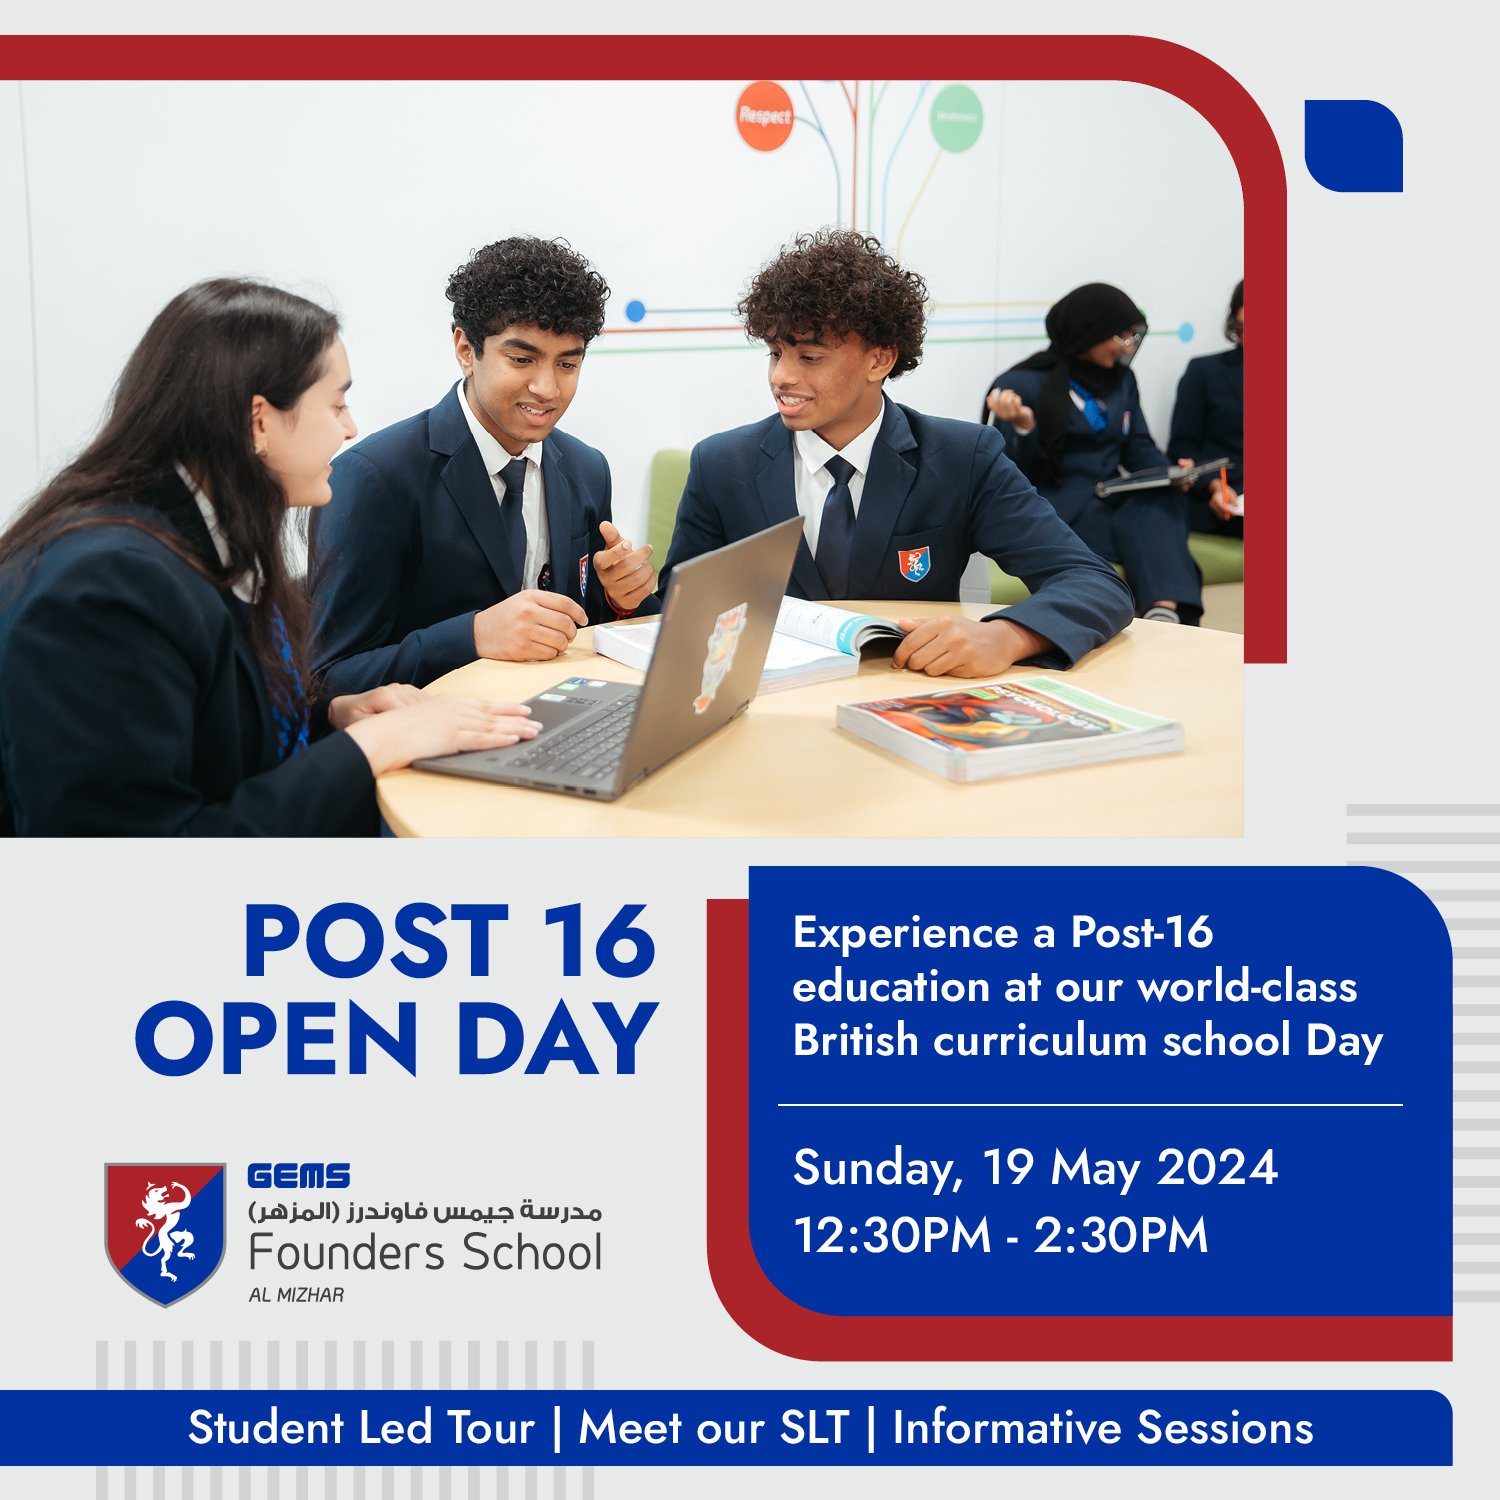 Post 16 Open Day